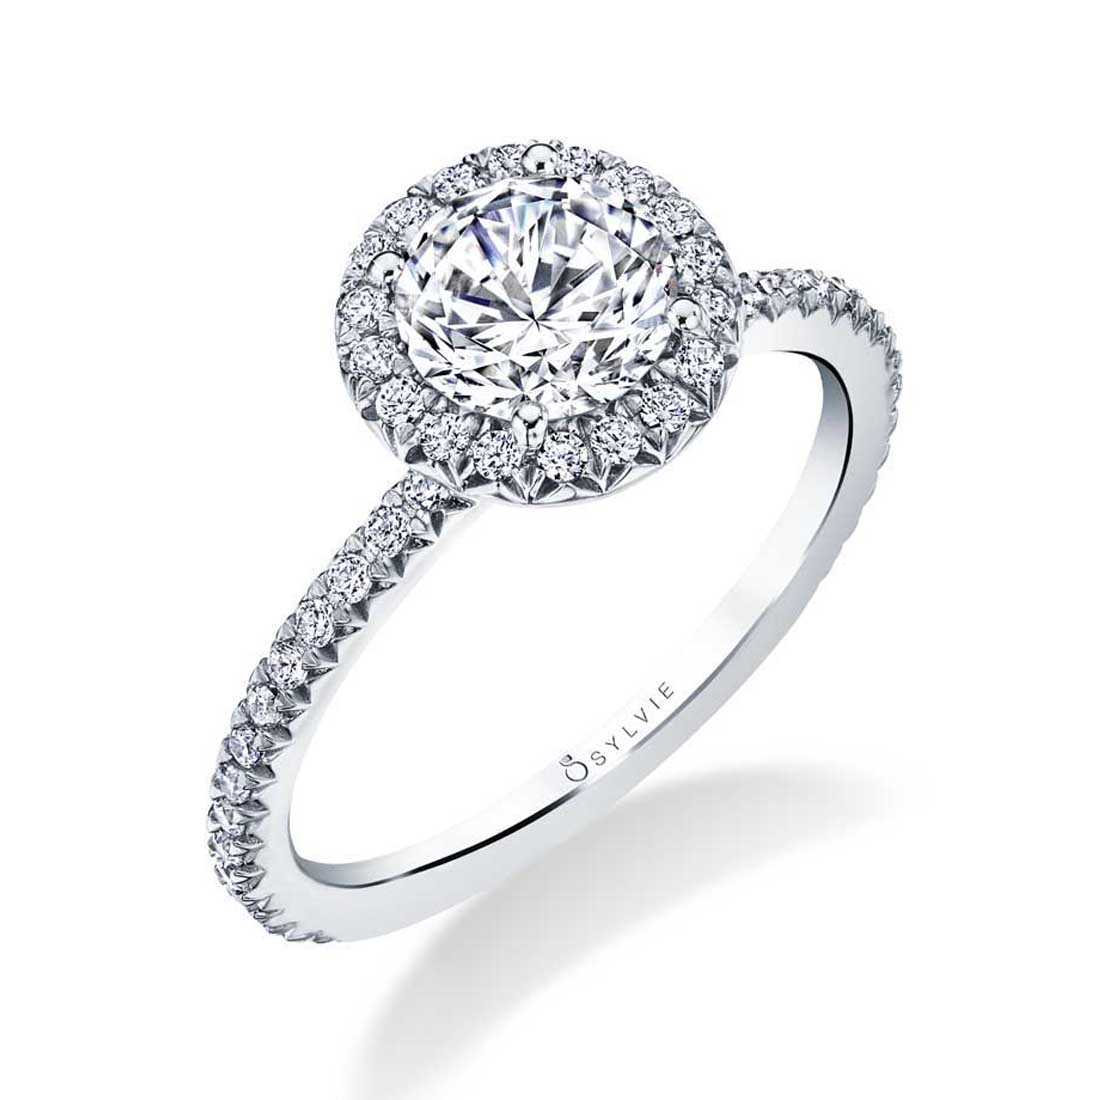 Halo engagement ring S1793 Sylvie